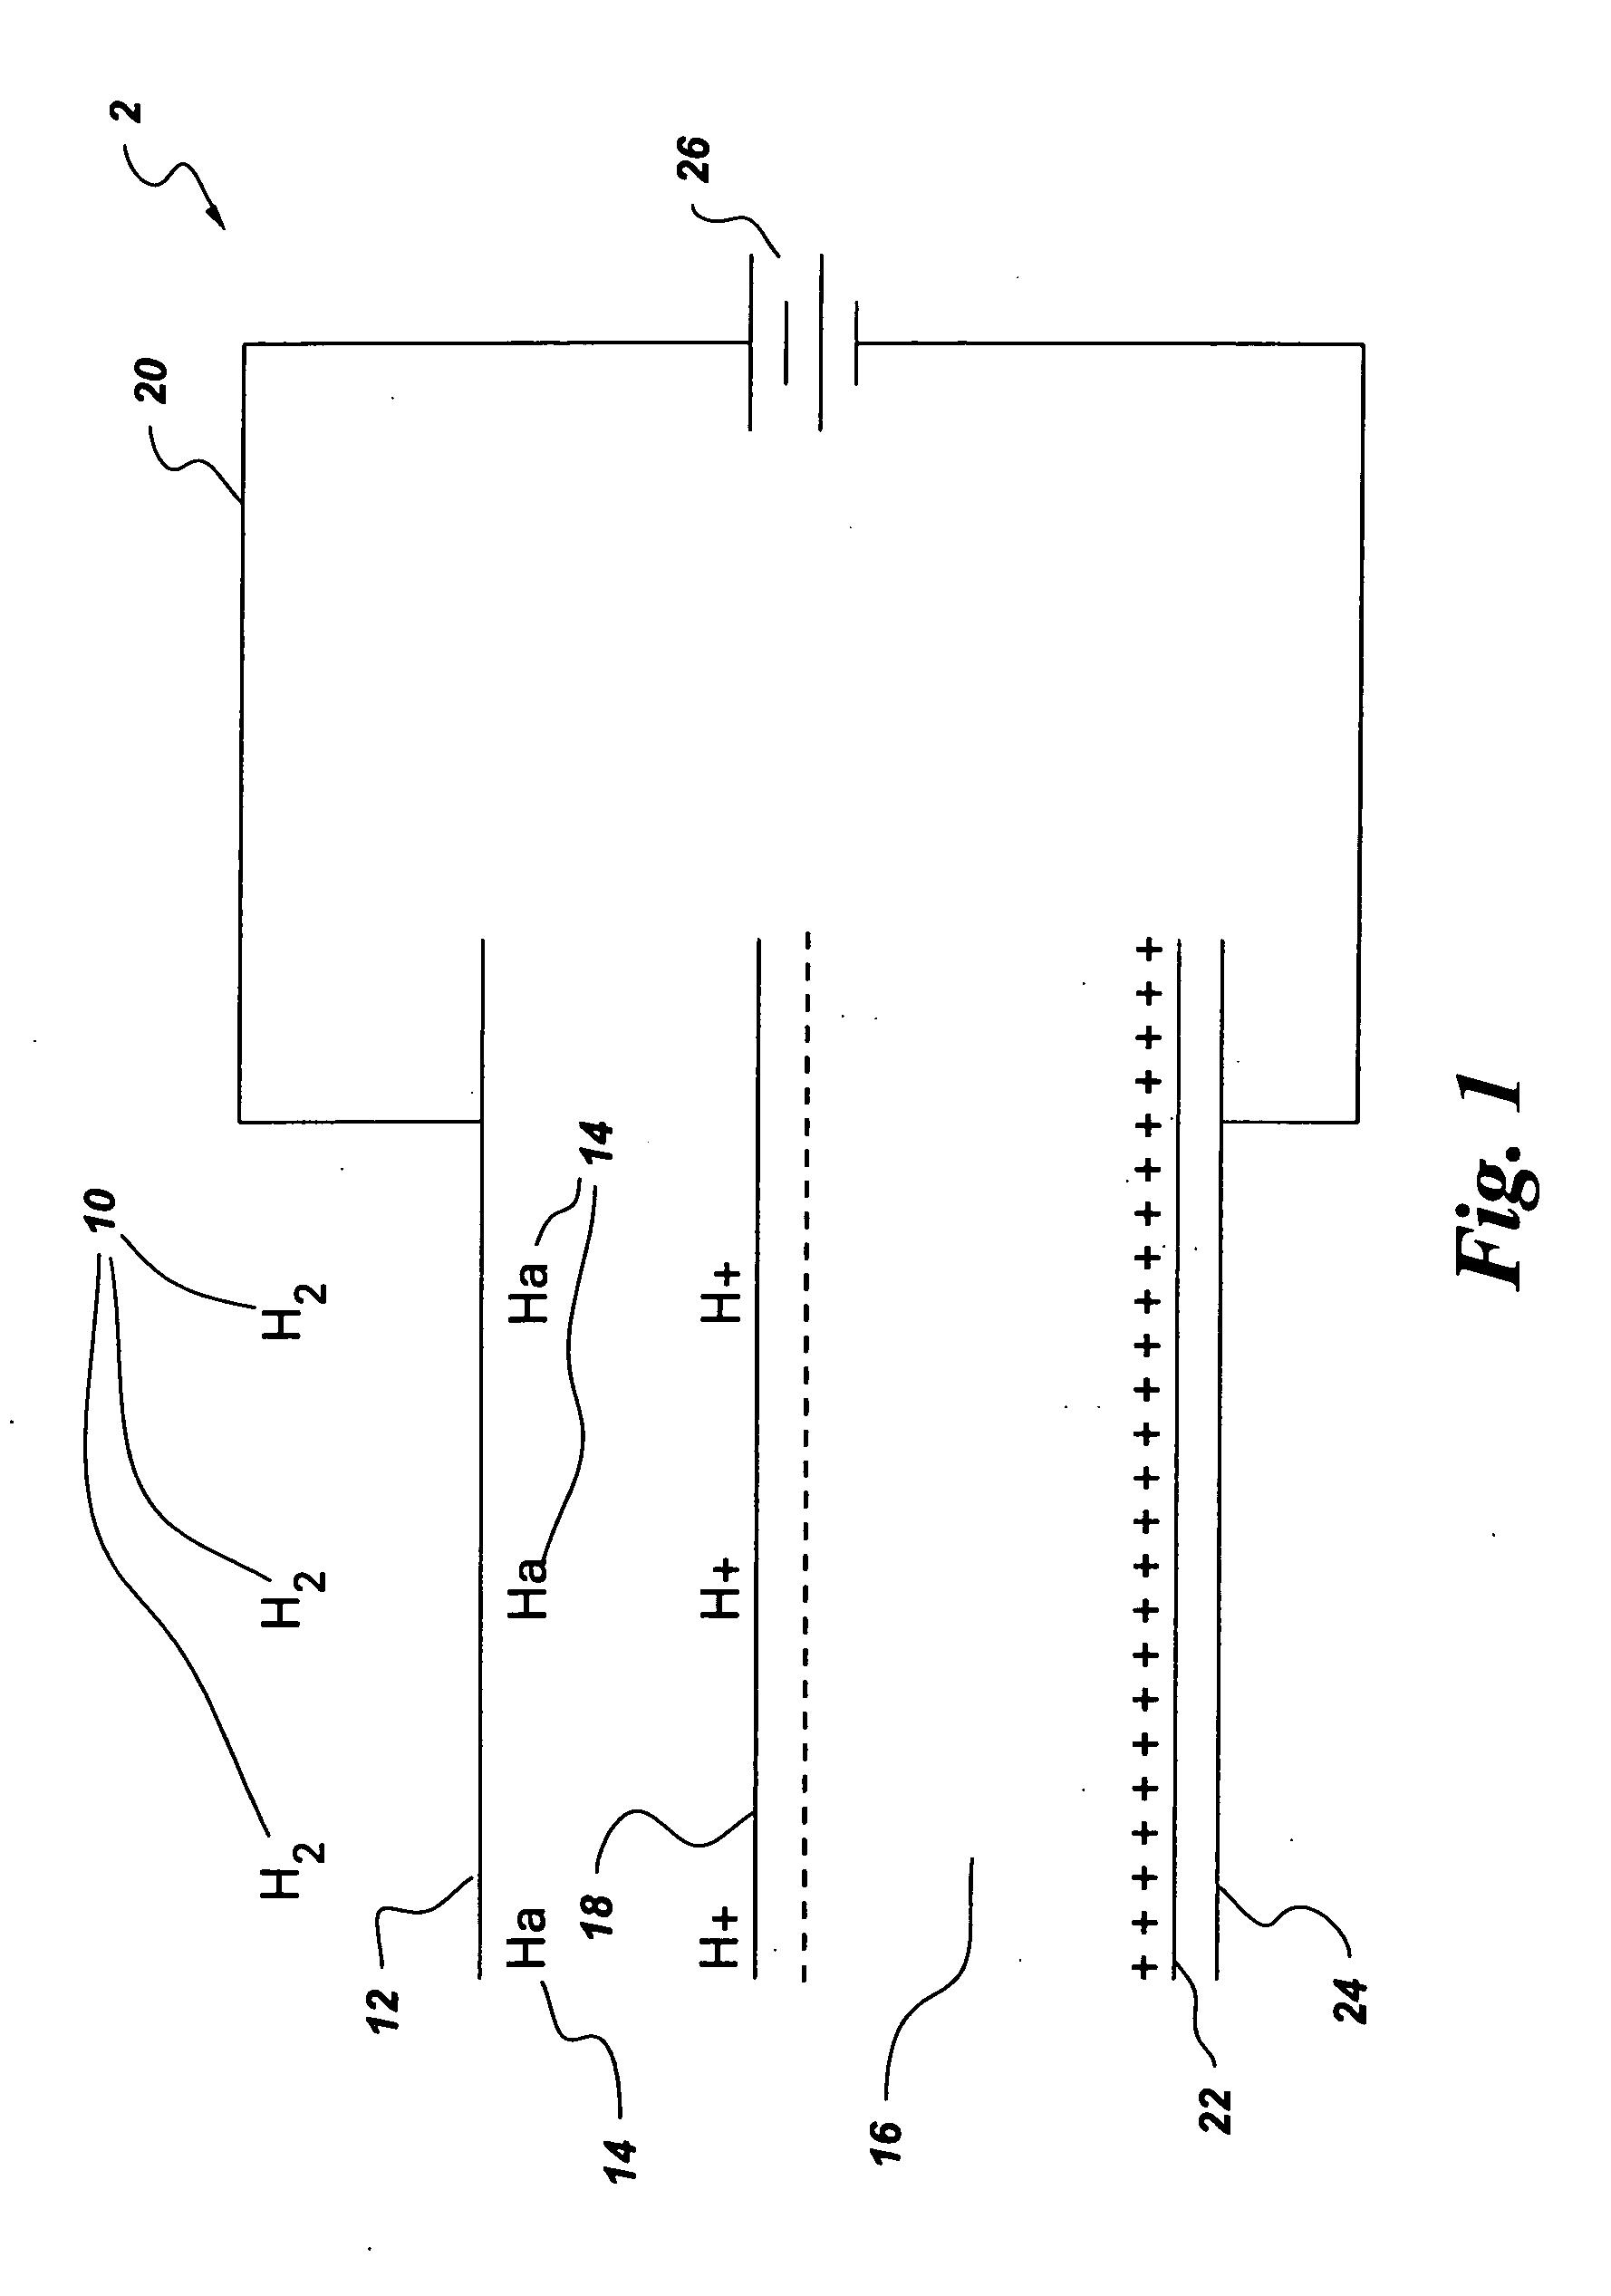 System and method for storing hydrogen and electrical energy